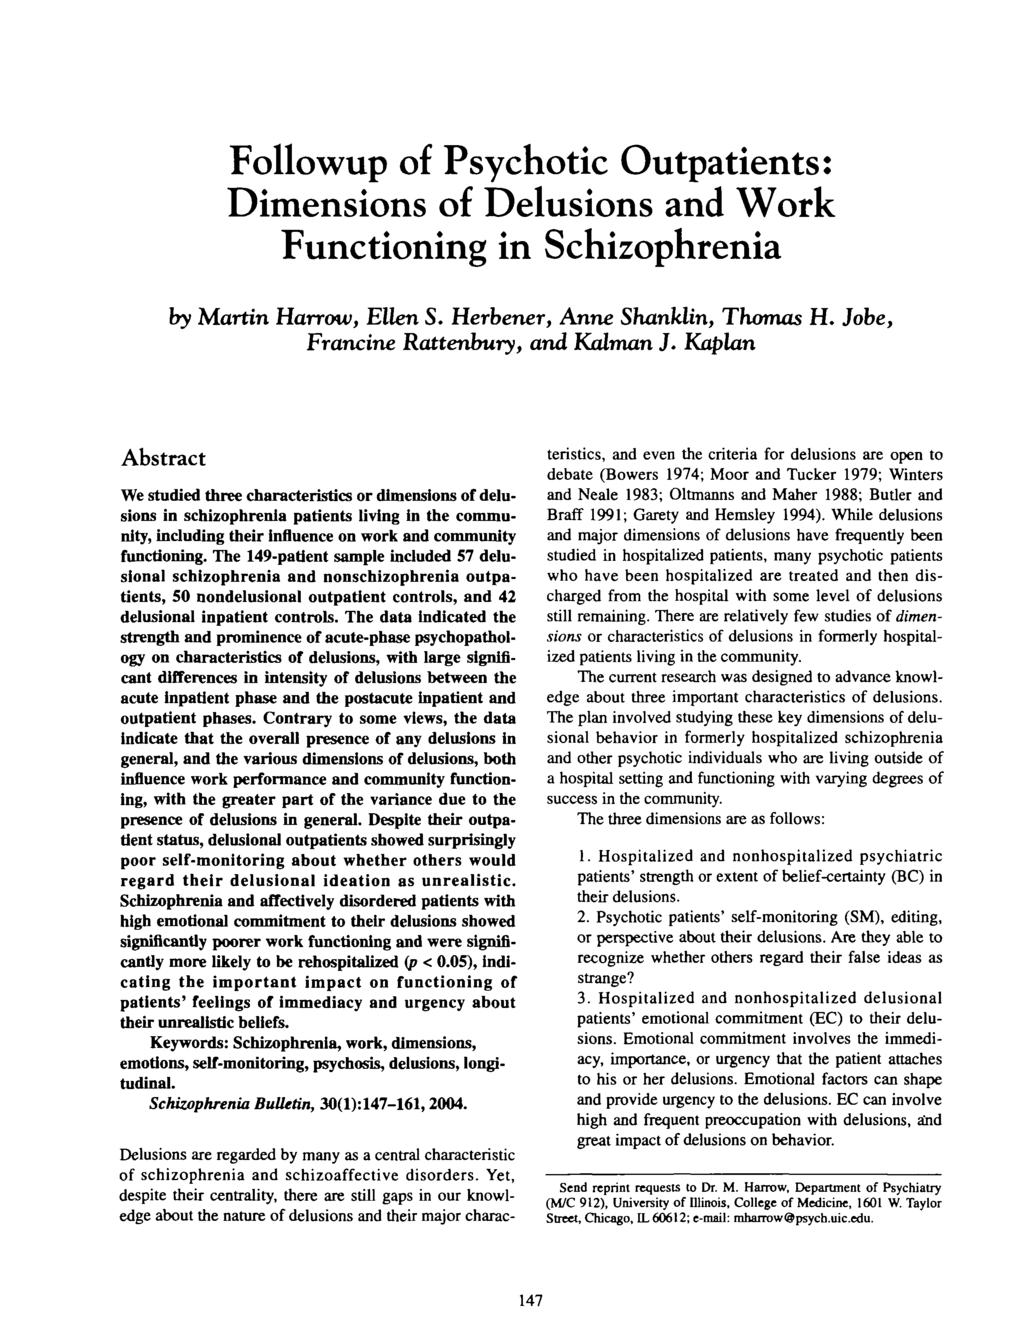 Followup of Psychotic Outpatients: Dimensions of Delusions and Work Functioning in Schizophrenia by Martin Harrow, Ellen S. Herbener, Anne Shanldin, Thomas H. Jobe, Francine Rattenbury, and FJalman J.